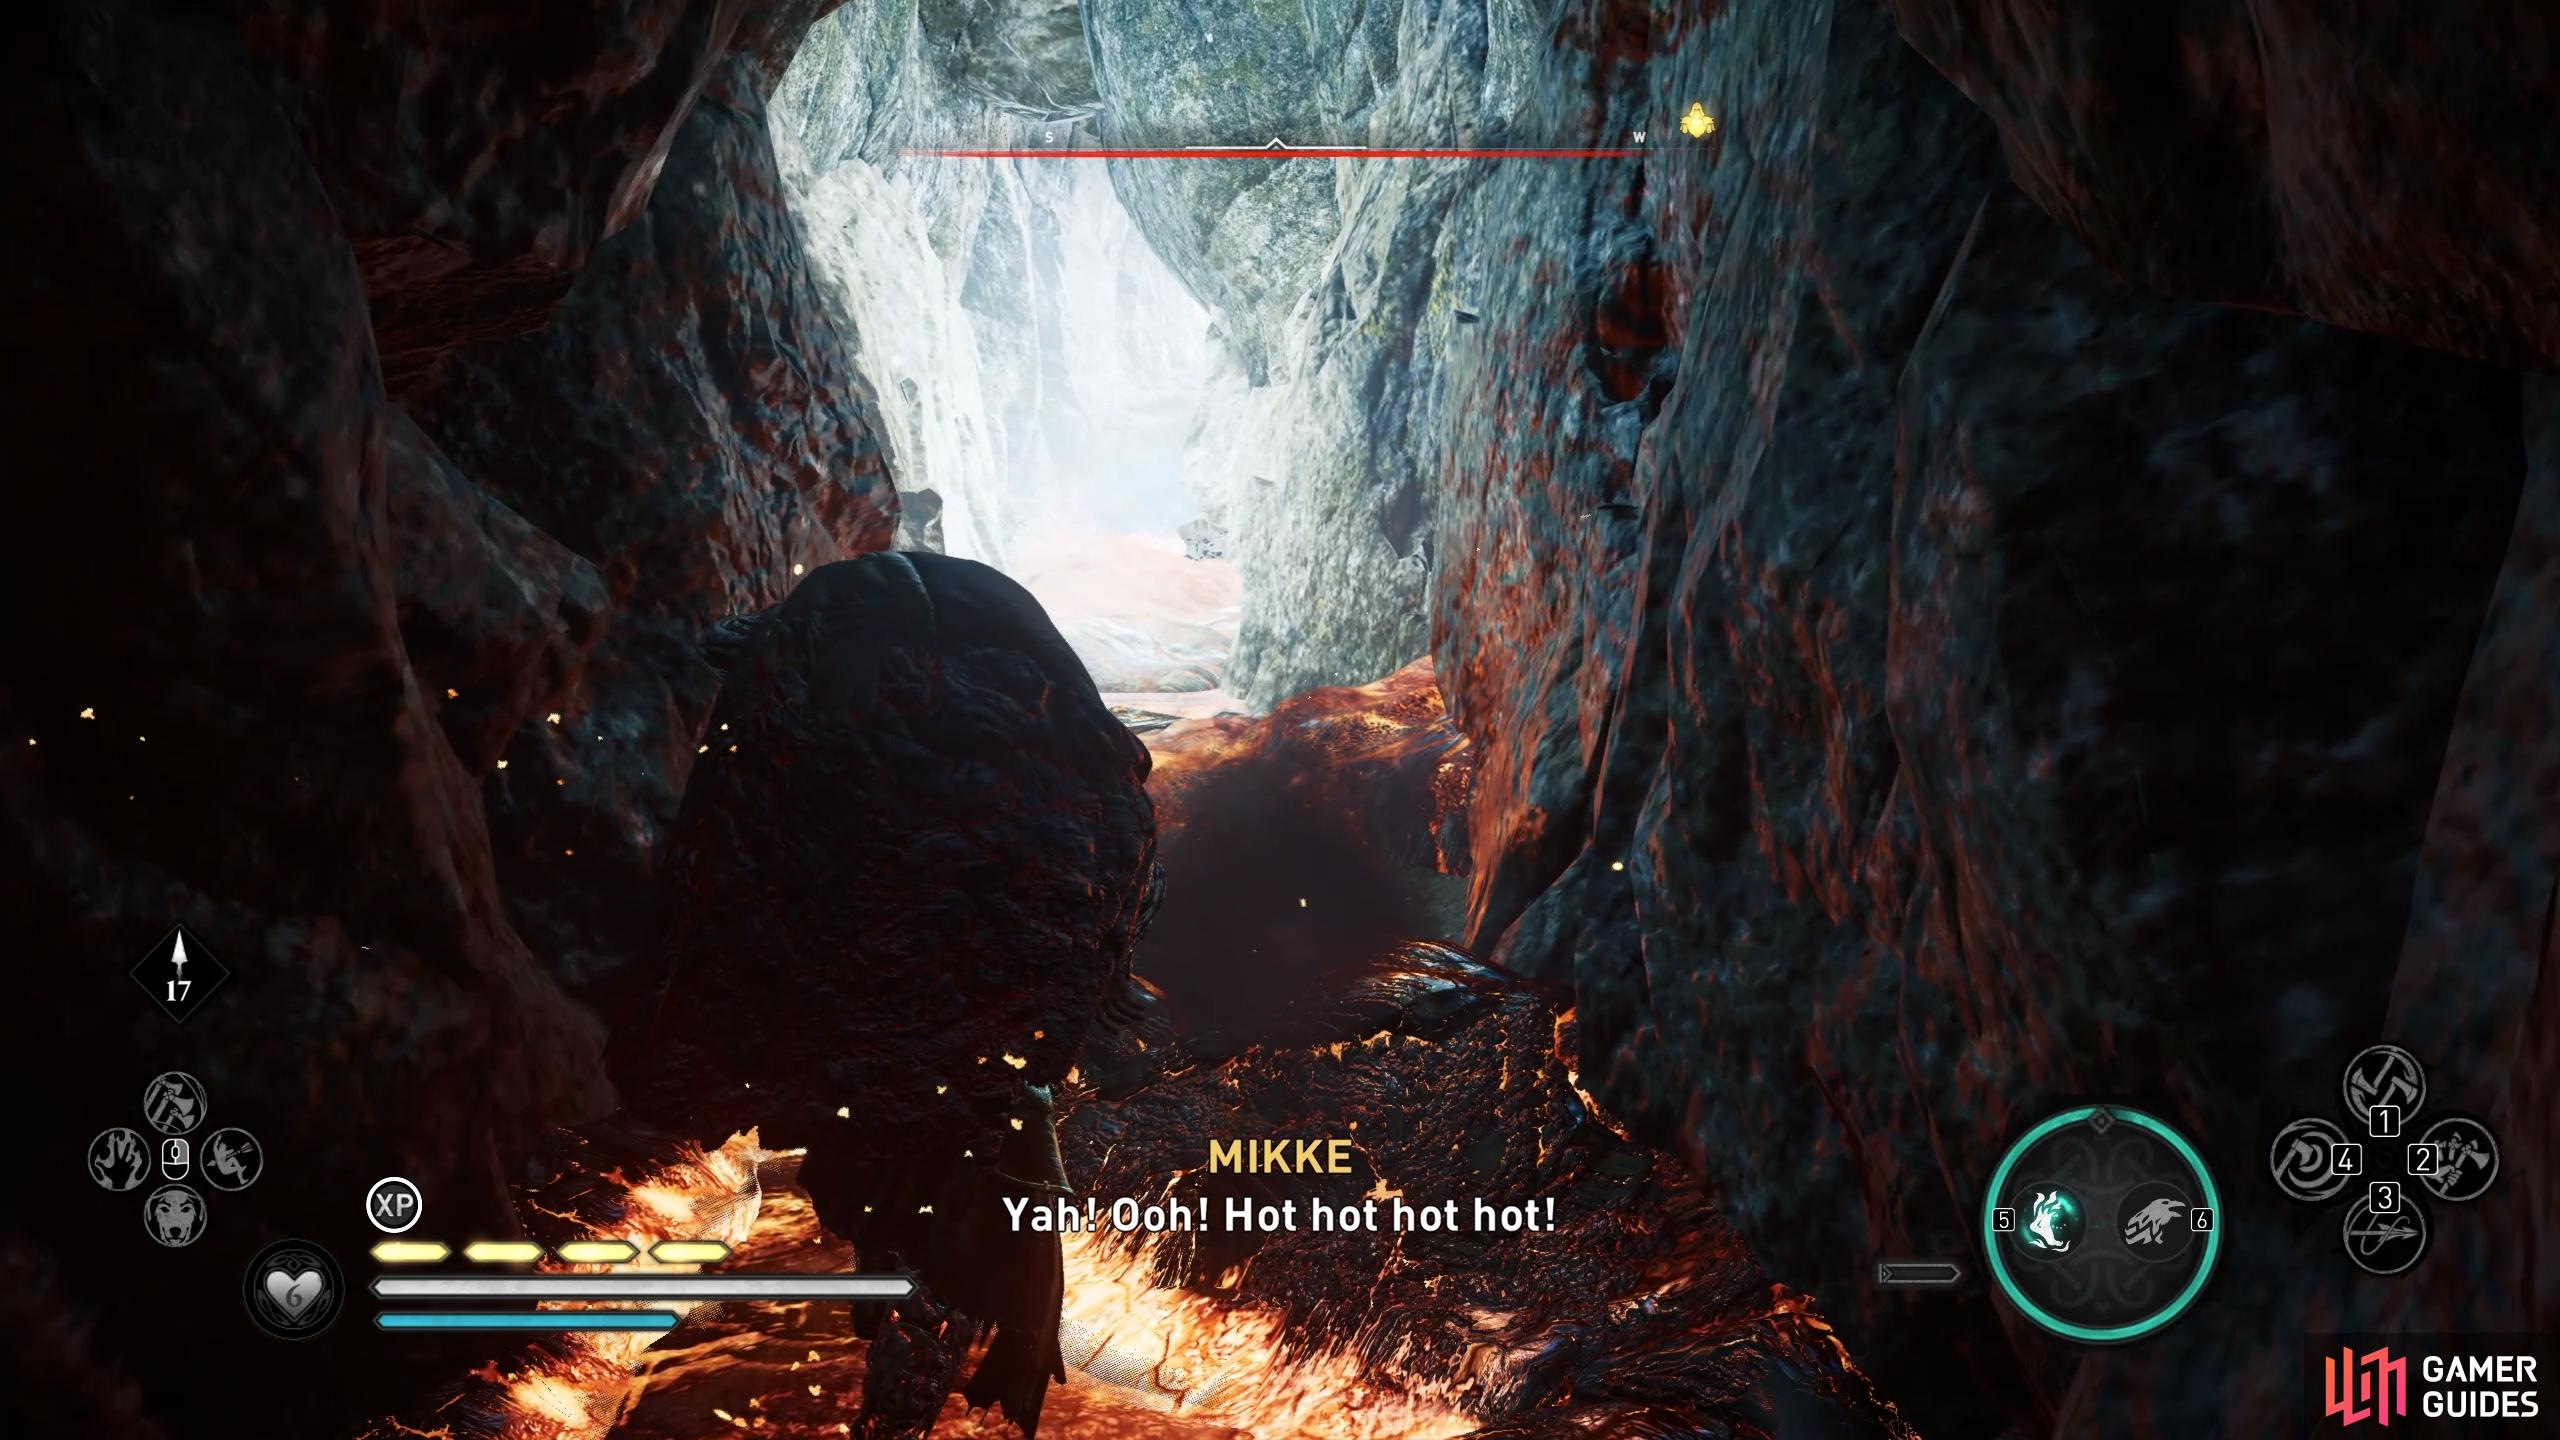 Carry Mikke out of the cave using the Power of Muspelheim.